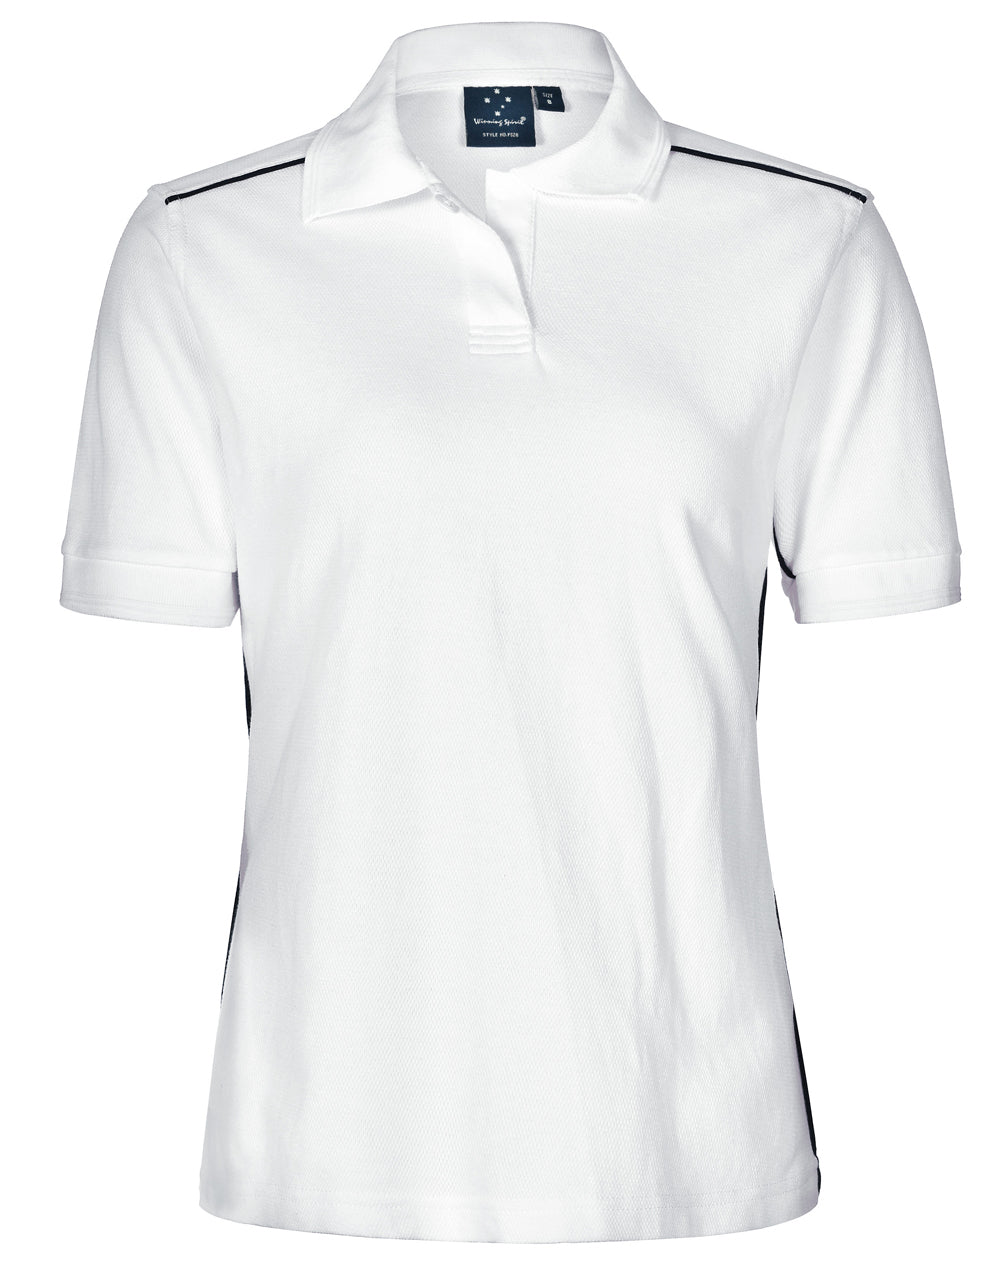 Winning Spirit Men's Pure Cotton Contrast Piping Short Sleeve Polo-(PS25)